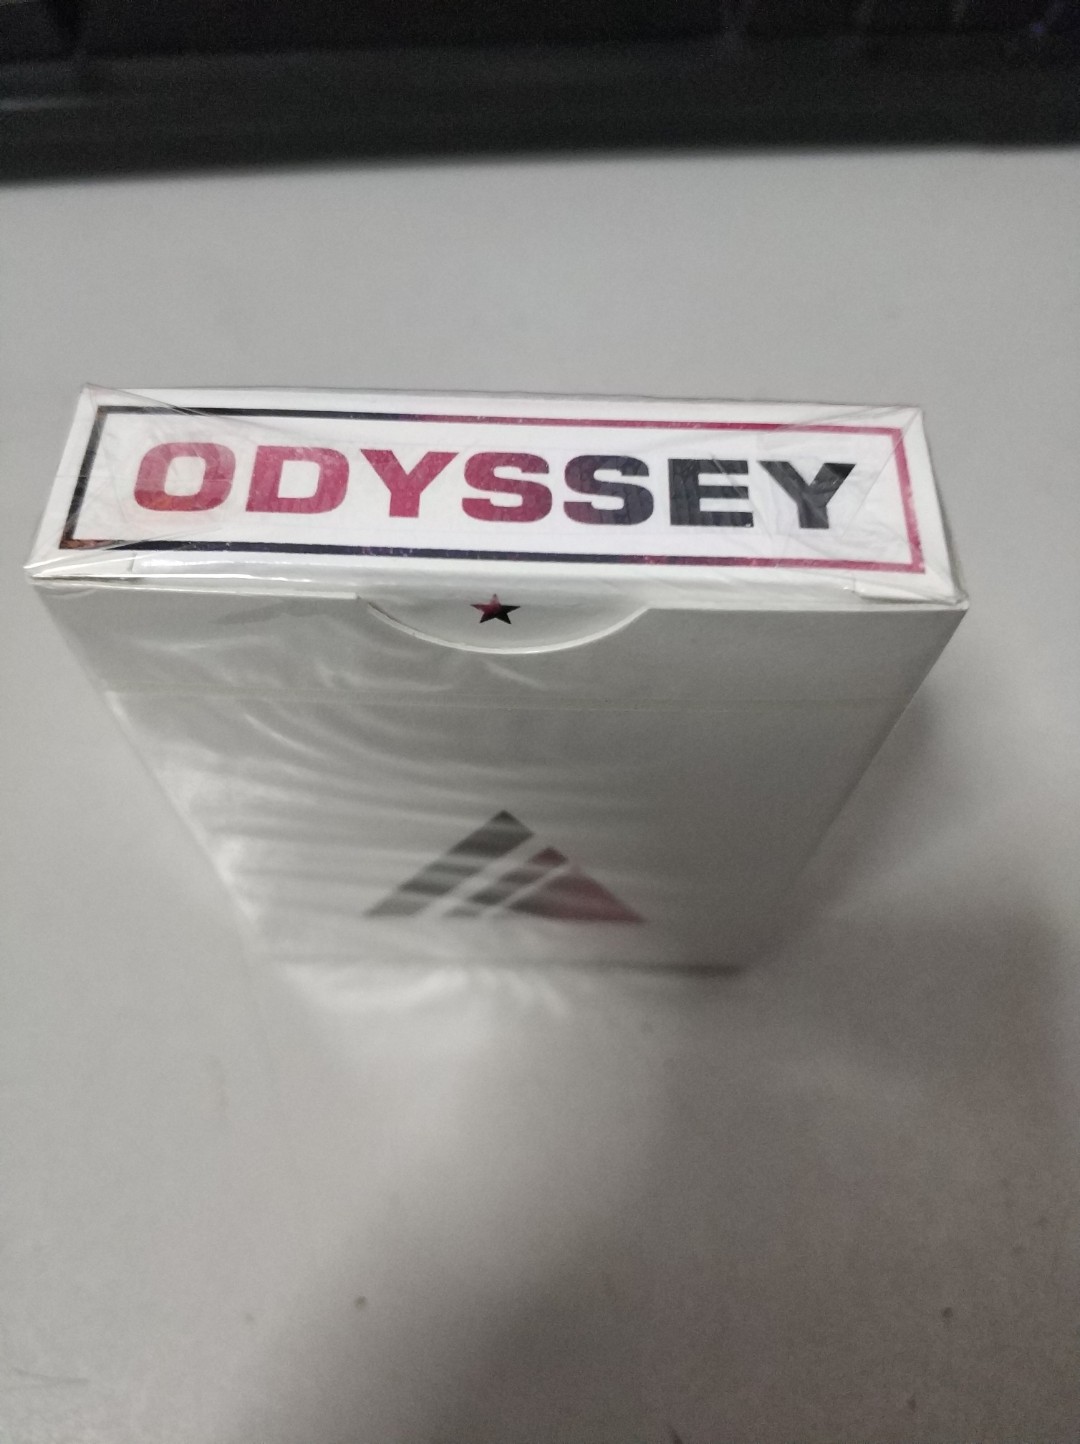 Odyssey Limited Edition V1 Playing Cards